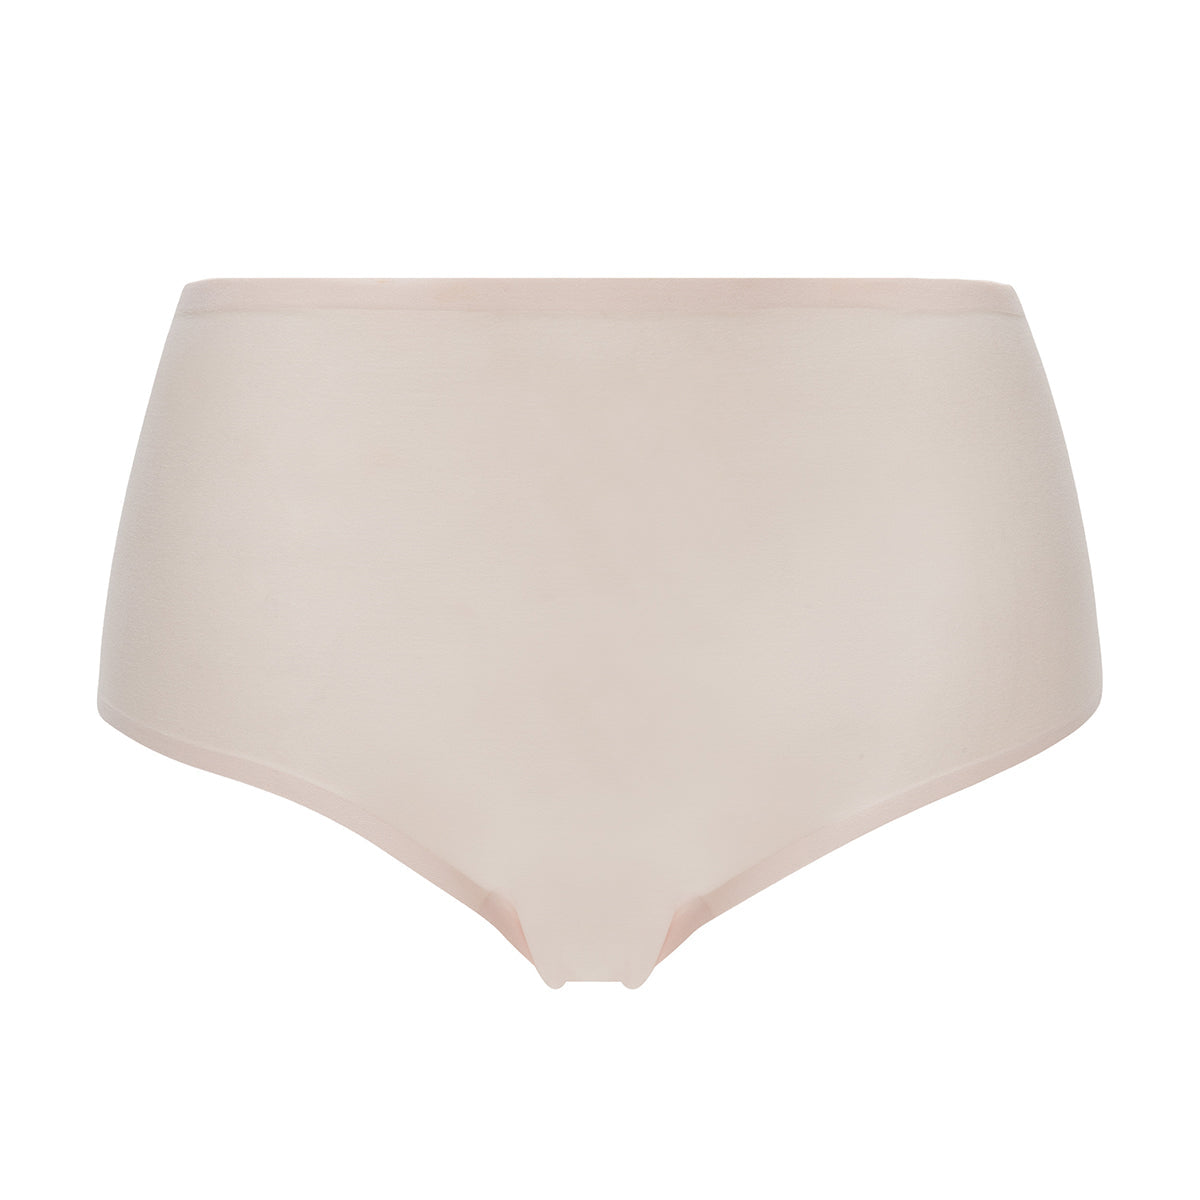 Chantelle Soft Stretch Brief 2647 in pink blush JW seamless panty lingerie canada linea intima